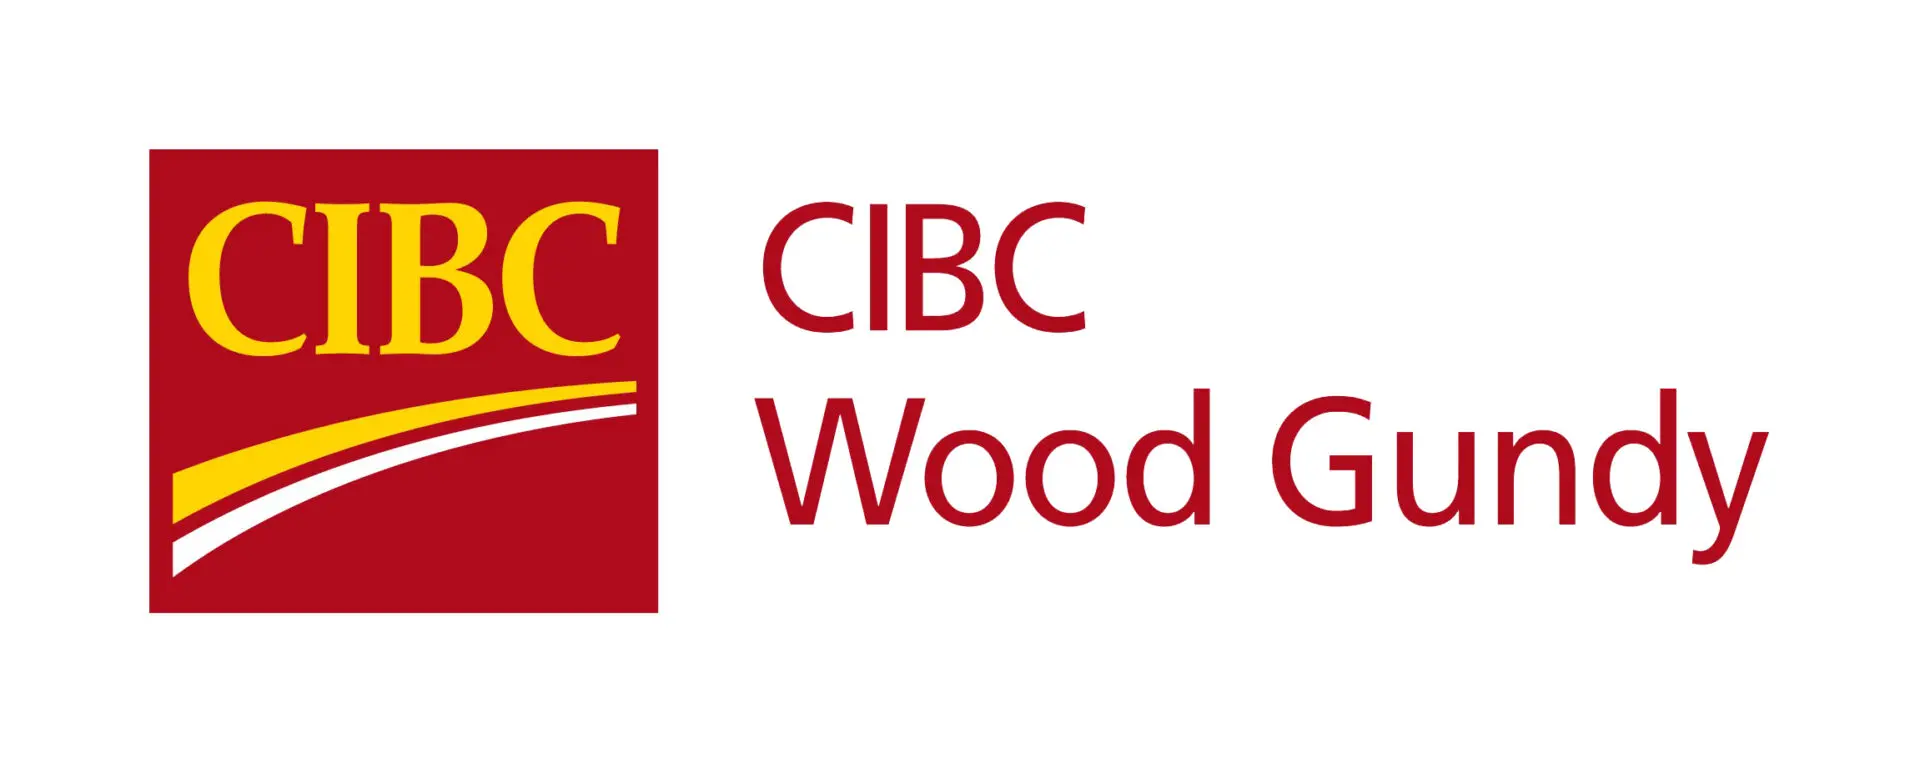 A red and yellow logo for cibc wood group.